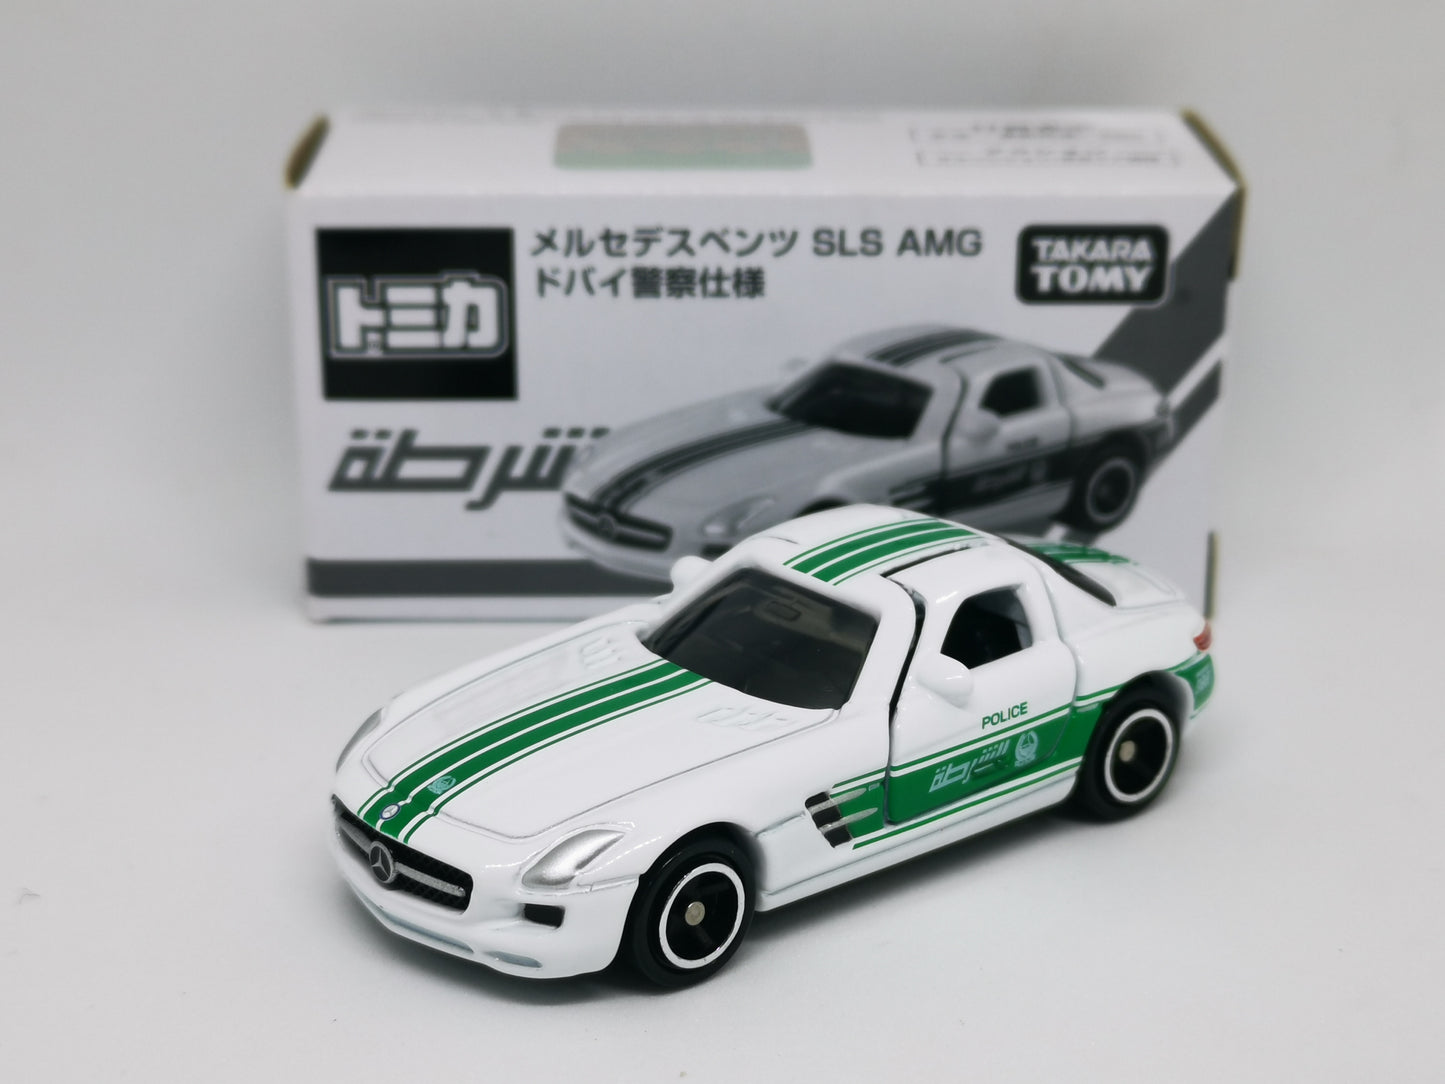 Tomica 2015 Mail In Lucky Draw Mercedes-Benz SLS AMG Dubai Police Car ver. 